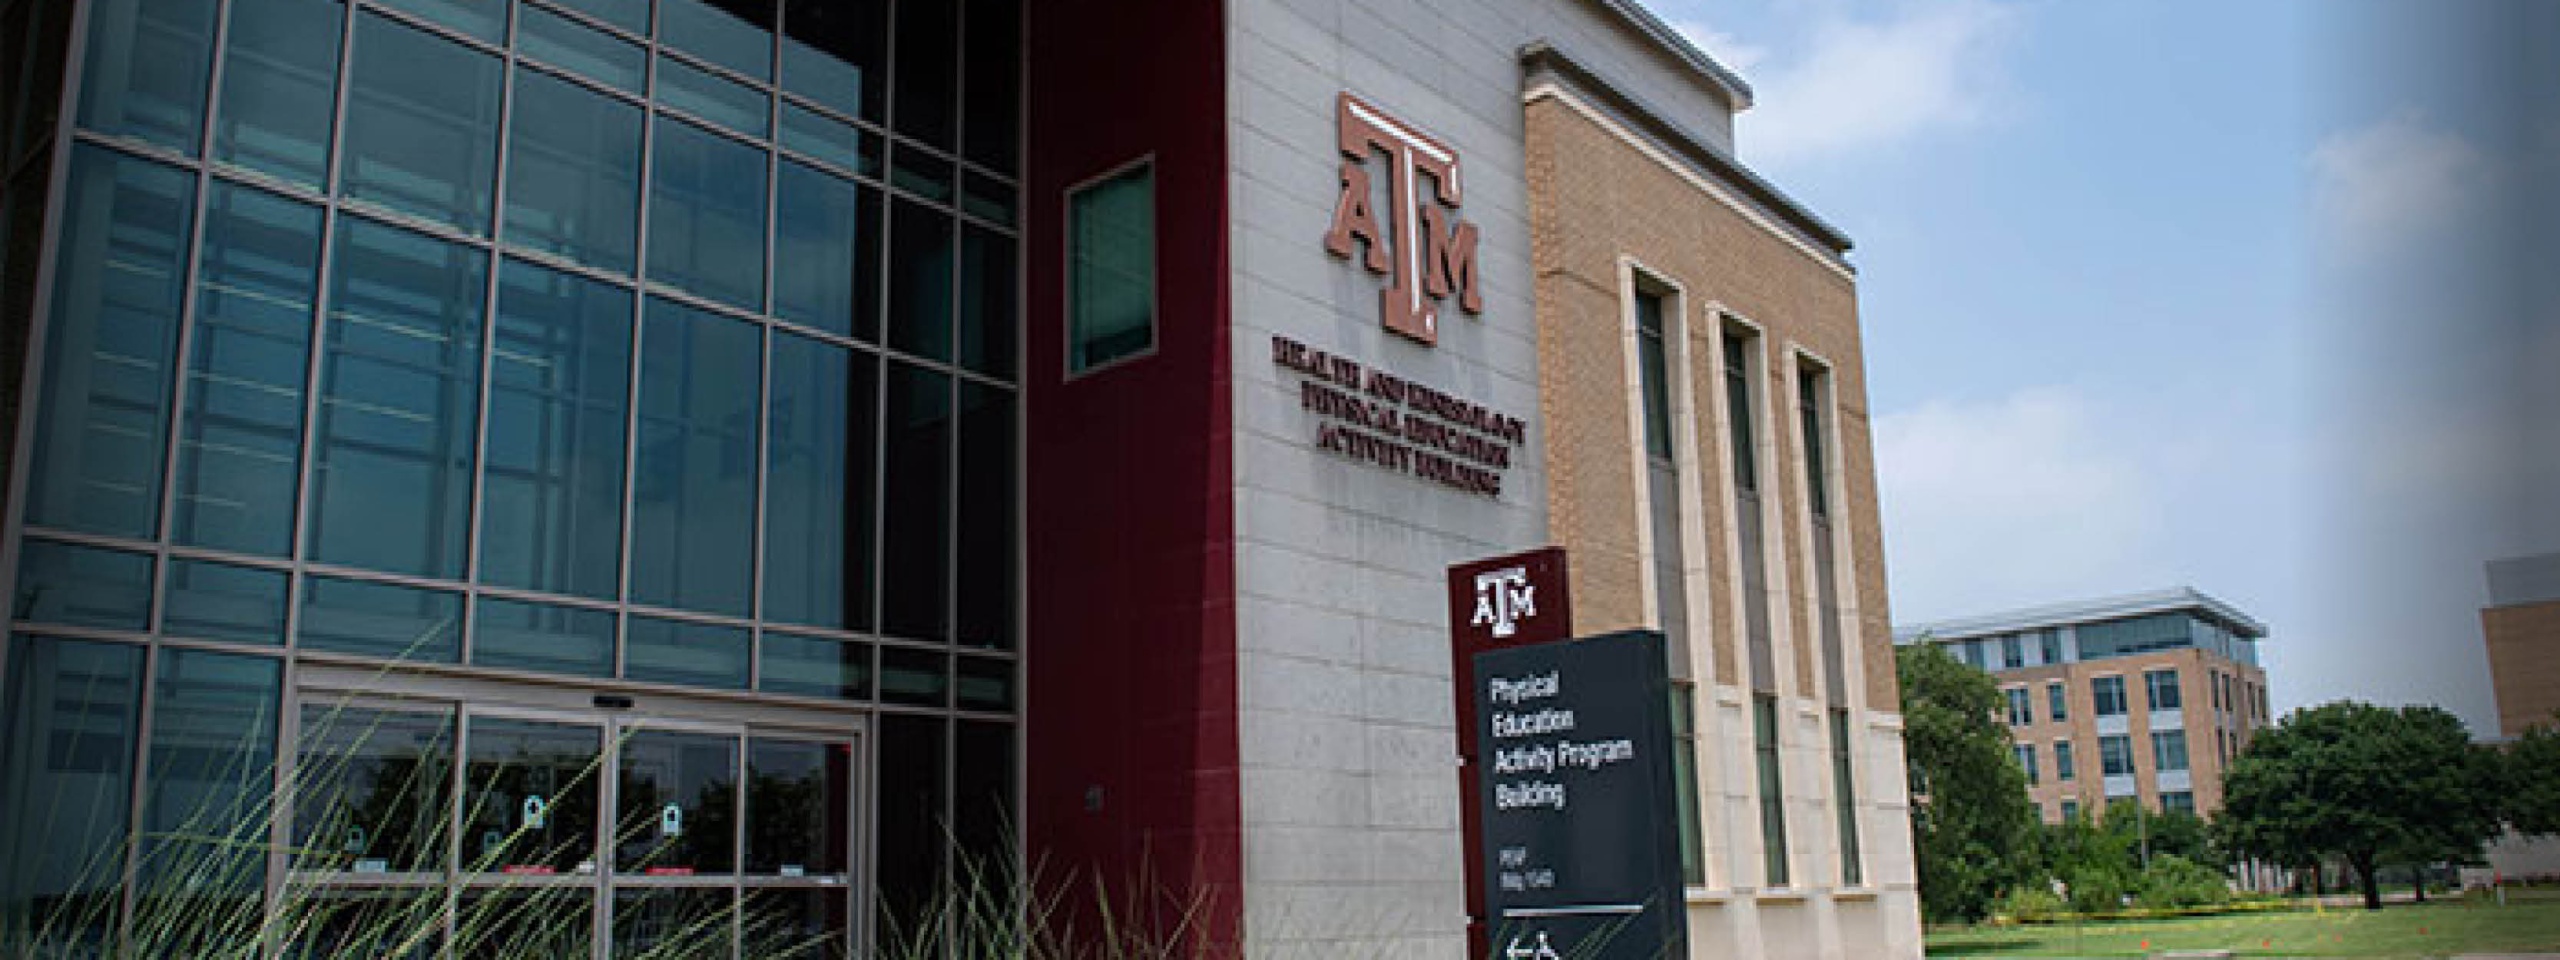 Texas A&M Universities main entrance of the PEAP building